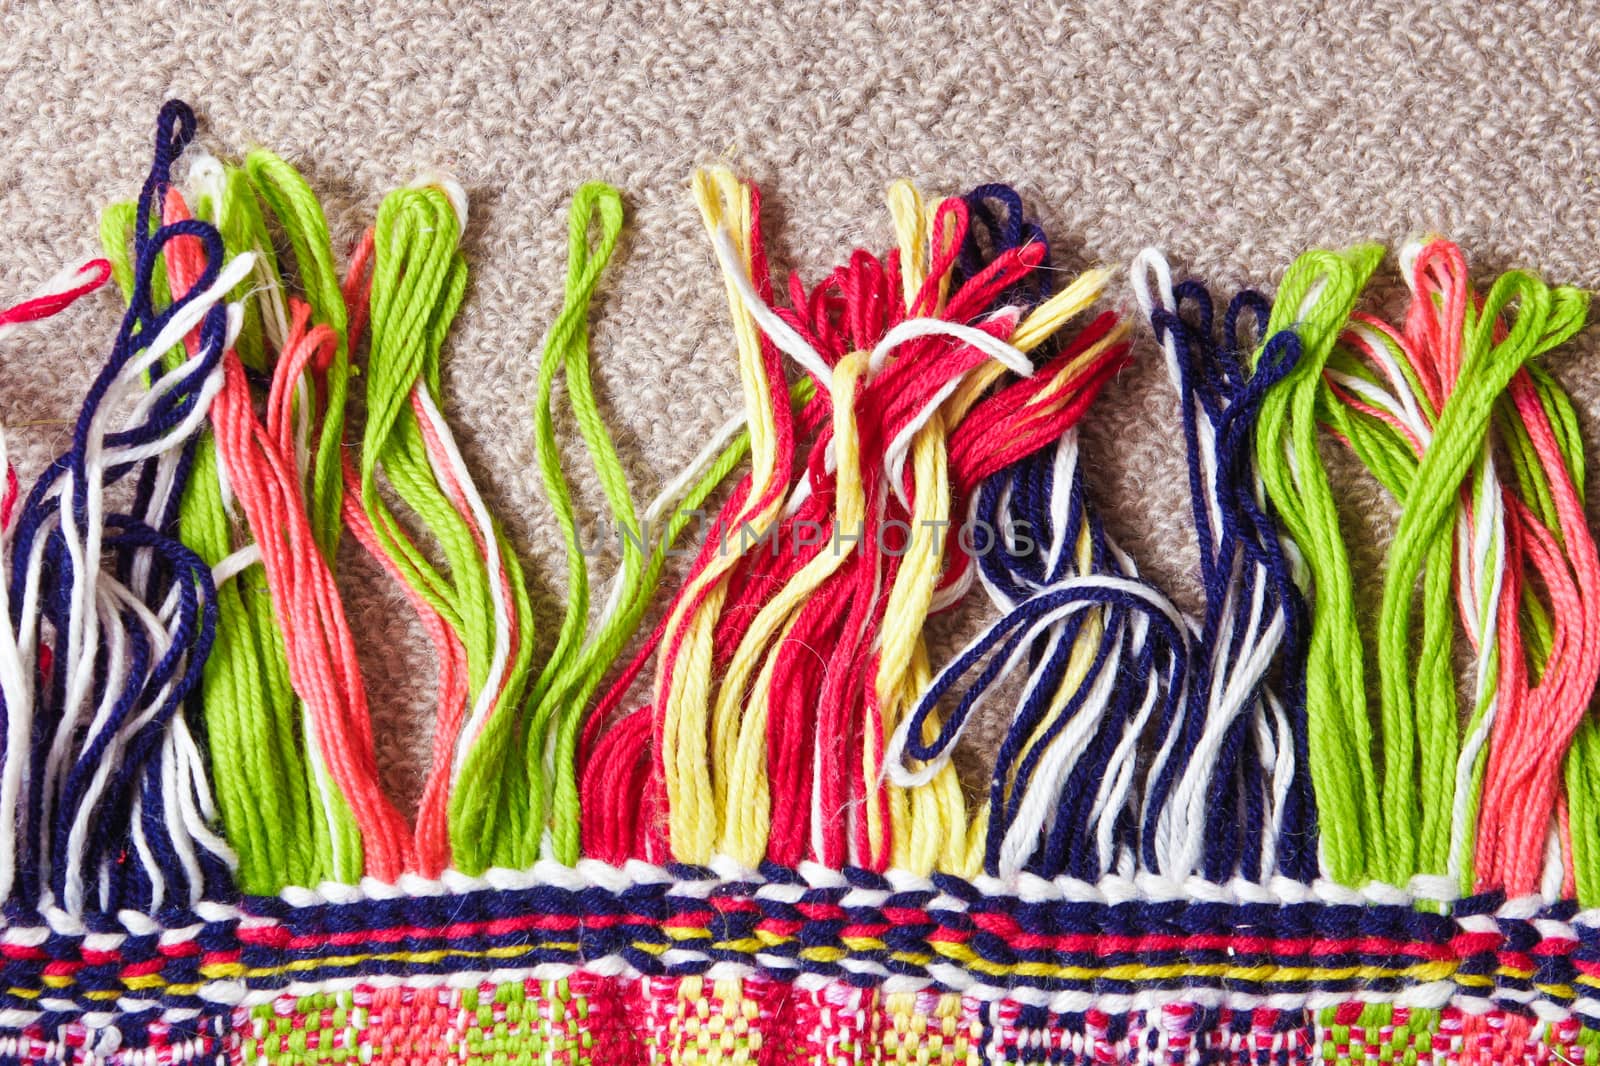 Tassles at the edge of a colorful carpet